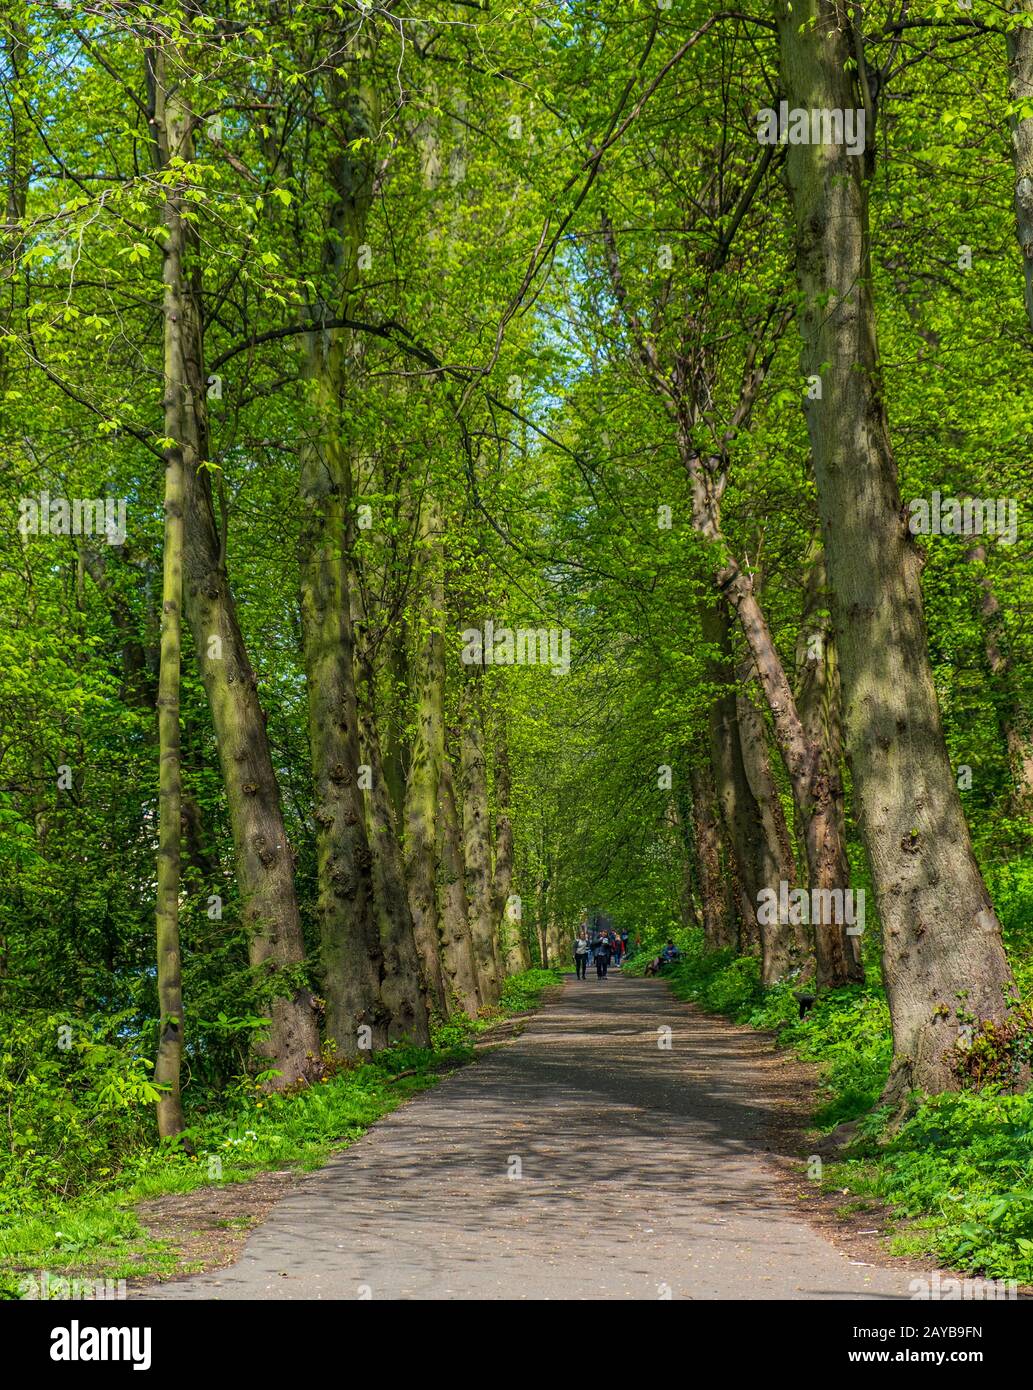 People walk along a walkway surrounded by a lush forest in Durham, United Kingdom on a beautiful spring day. Stock Photo